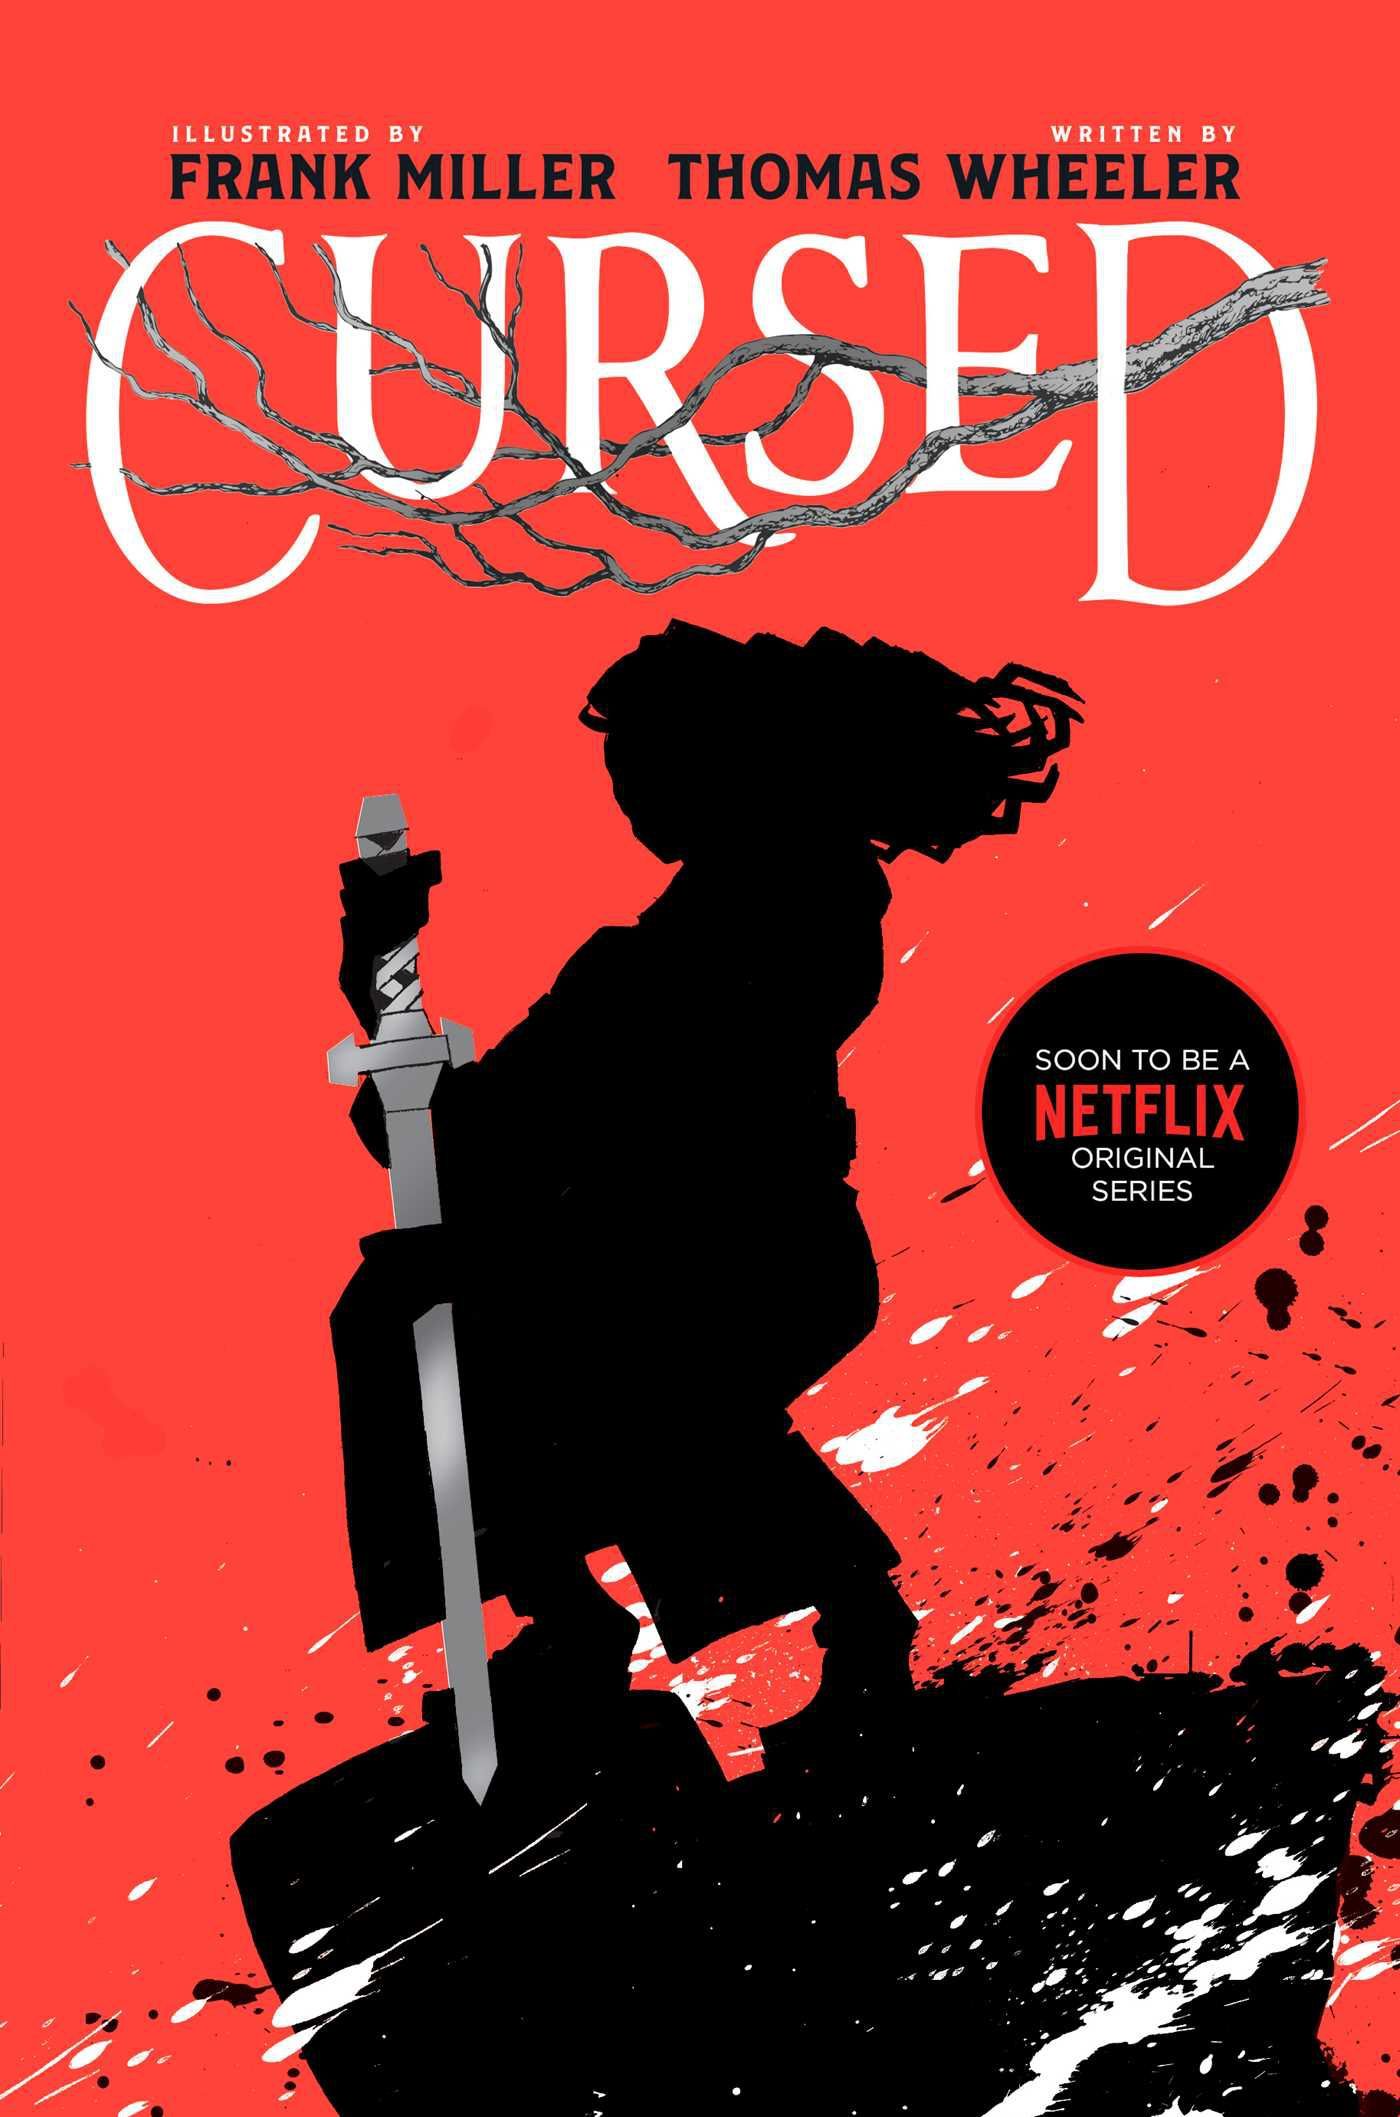 "Cursed" by Frank Miller and Thomas Wheeler